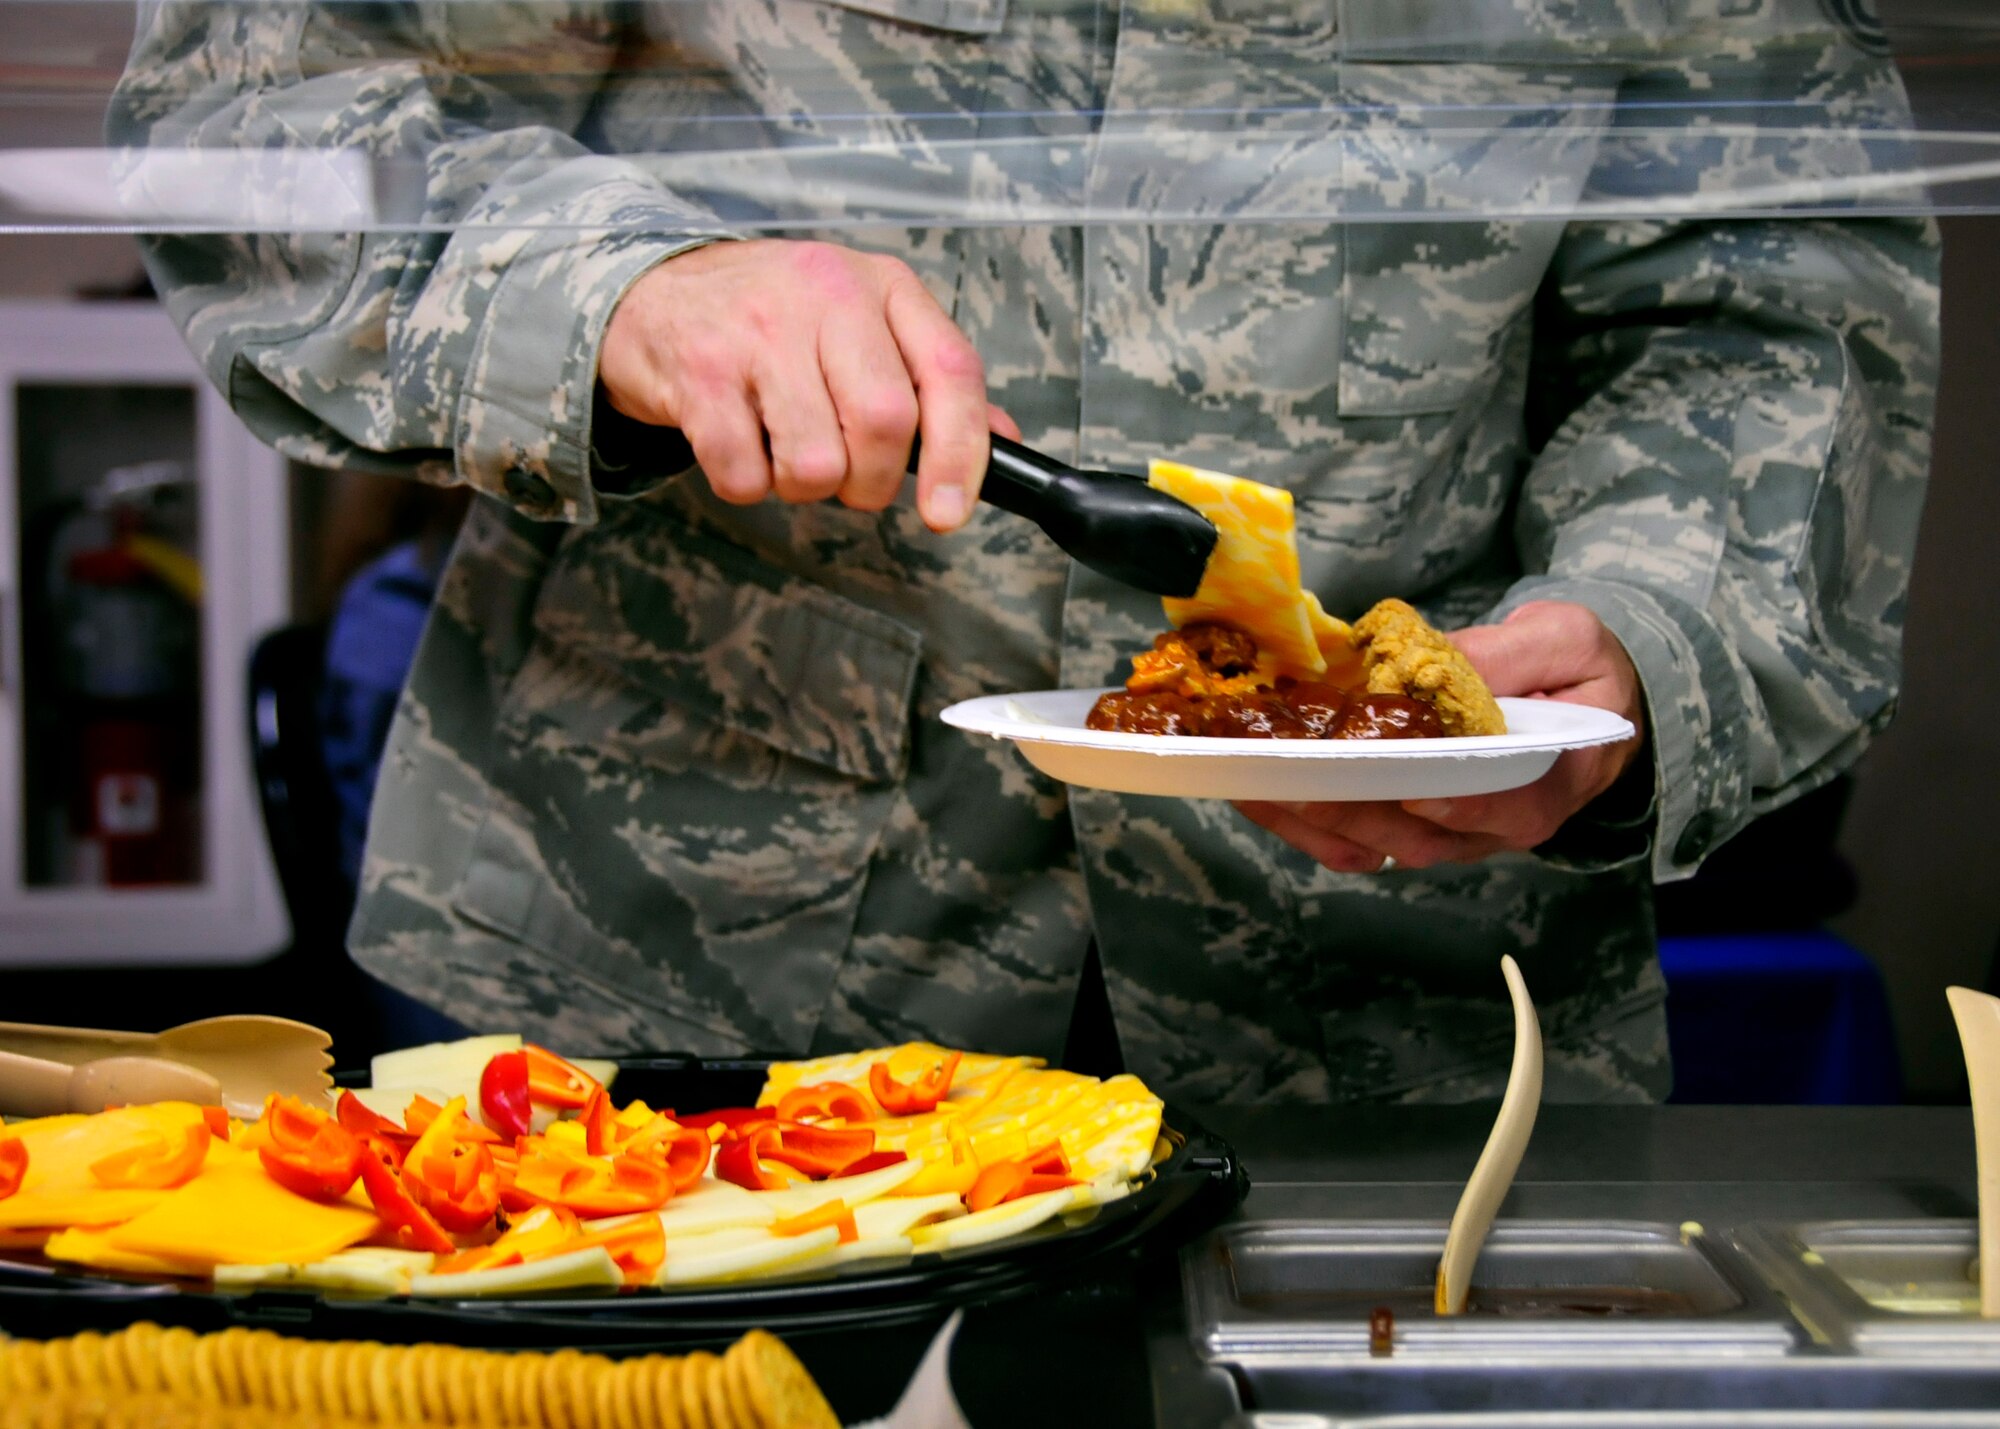 An Airman fills his plate with the free food provided at the grand opening of the newly remodeled Outpost at Duke Field, Fla., recently.  The grand opening featured free food, games and a live band to showcase the new facility.  The Outpost houses Gulf Coast Eats. The hours of operation are Monday-Friday 11 a.m. to 1 p.m. for lunch, Fridays and UTA Saturdays 3-8 p.m. The Outpost serves pizza, hotdogs, popcorn, pretzels and nachos during its evening hours. (U.S. Air Force photo/Tech. Sgt. Jasmin Taylor)